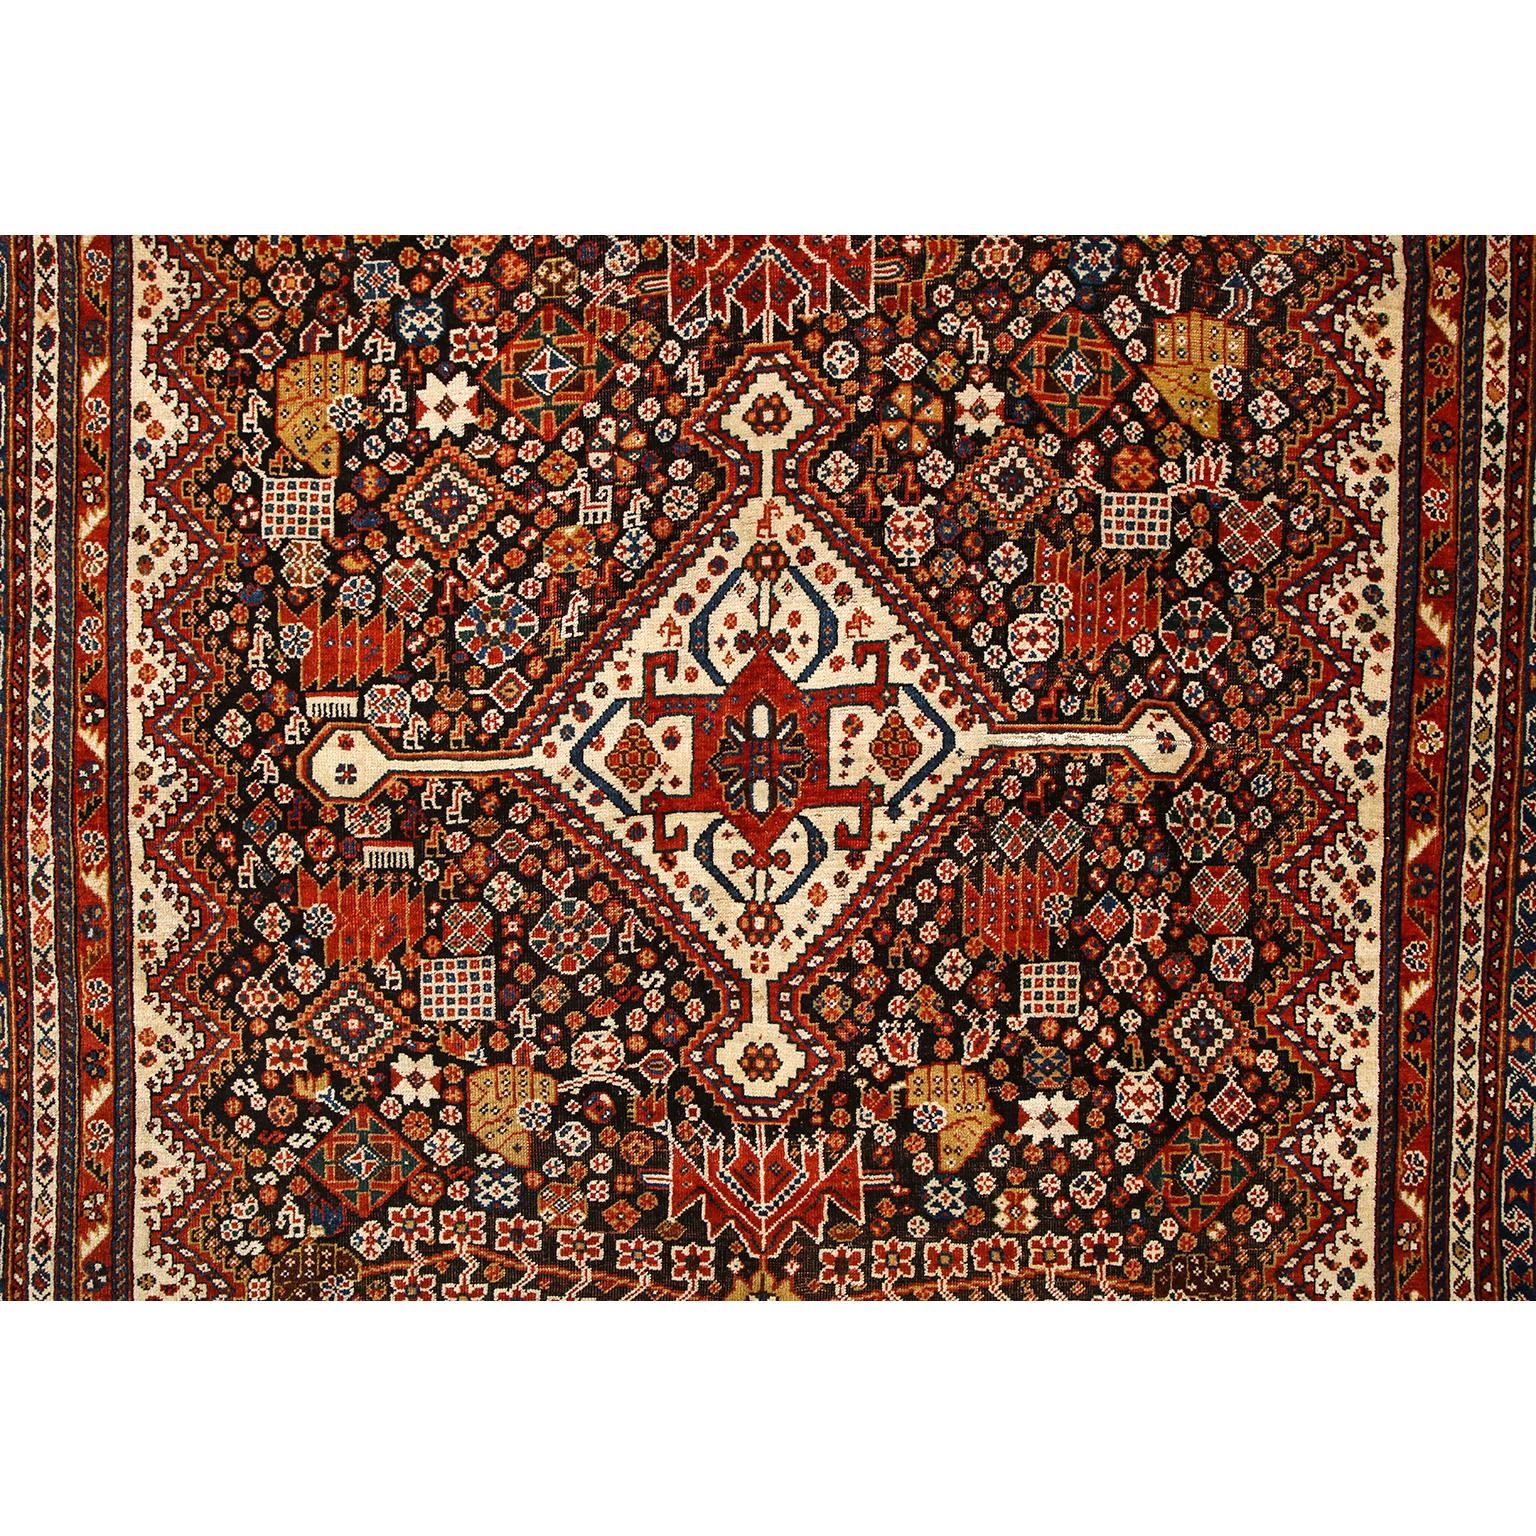 This antique Persian Kashkouli carpet in pure handspun wool and vegetable dyes circa 1900 features a central stylized 